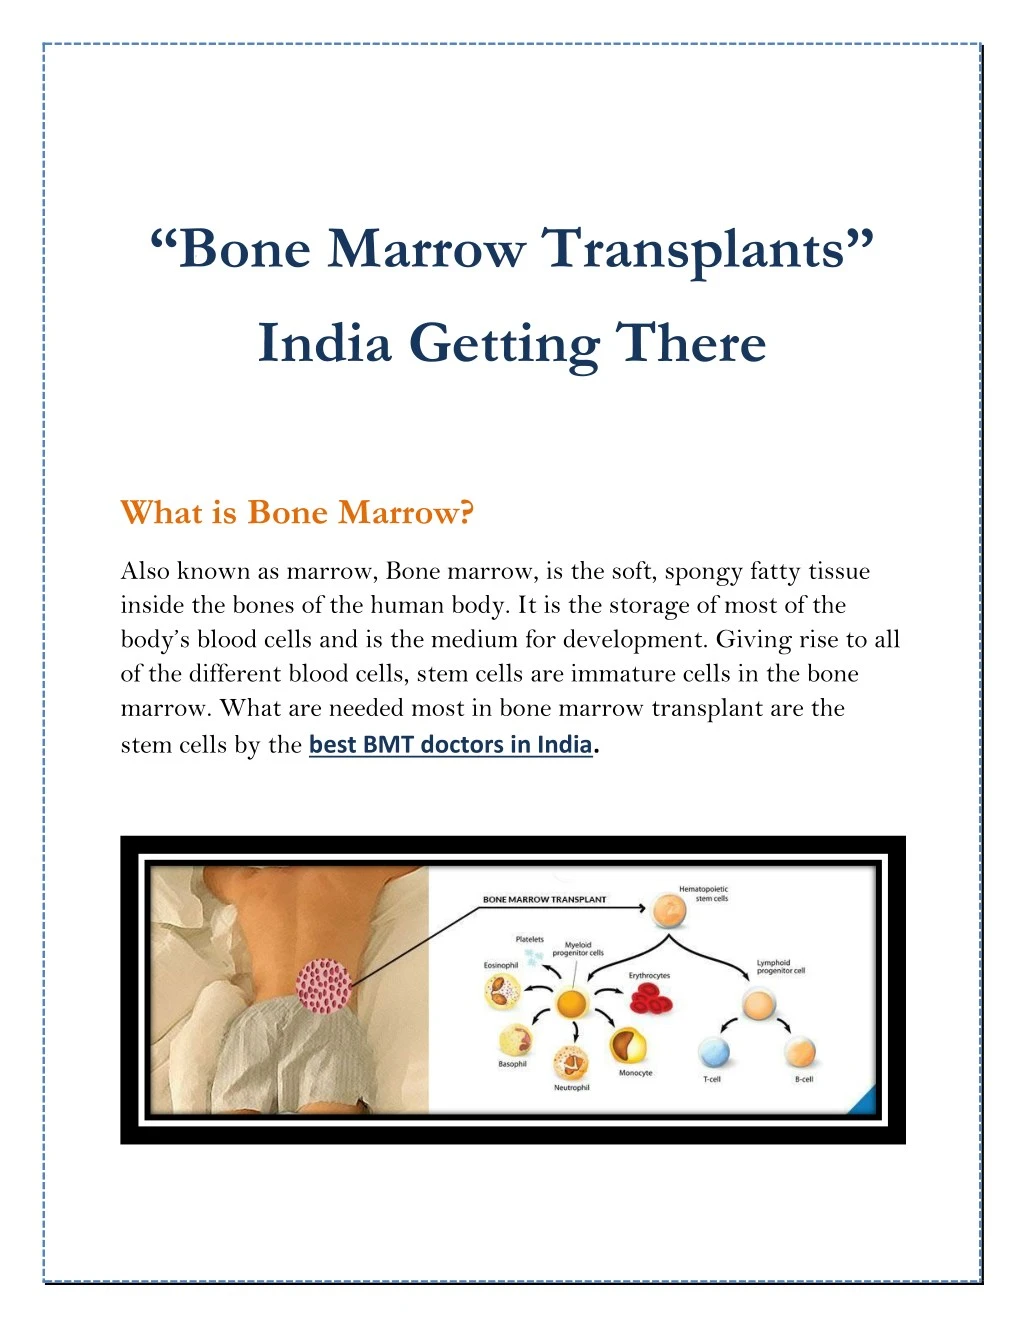 b one marrow transplants india getting there